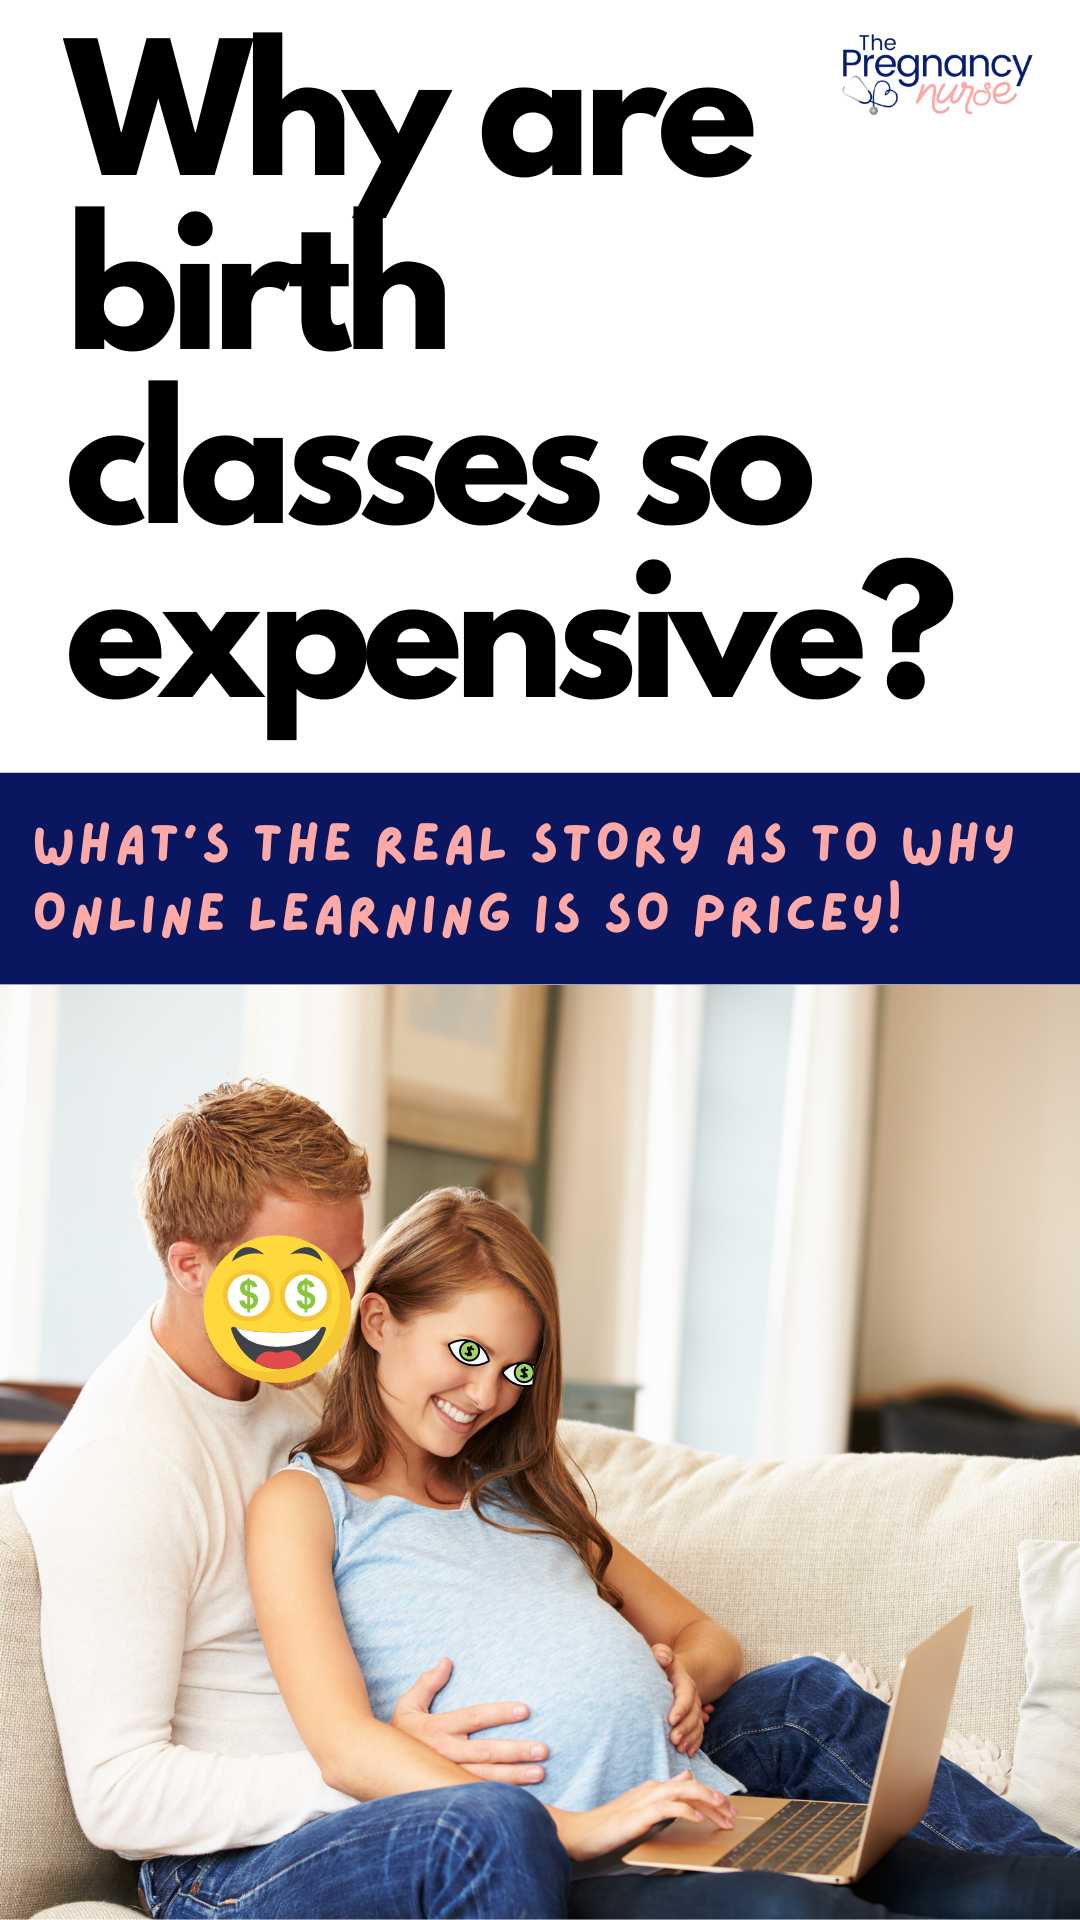 pregnant couple looking at a laptop with dollar sign eyes / why are birth classes so expensive? What’s the real story as to why online learning is so pricey!